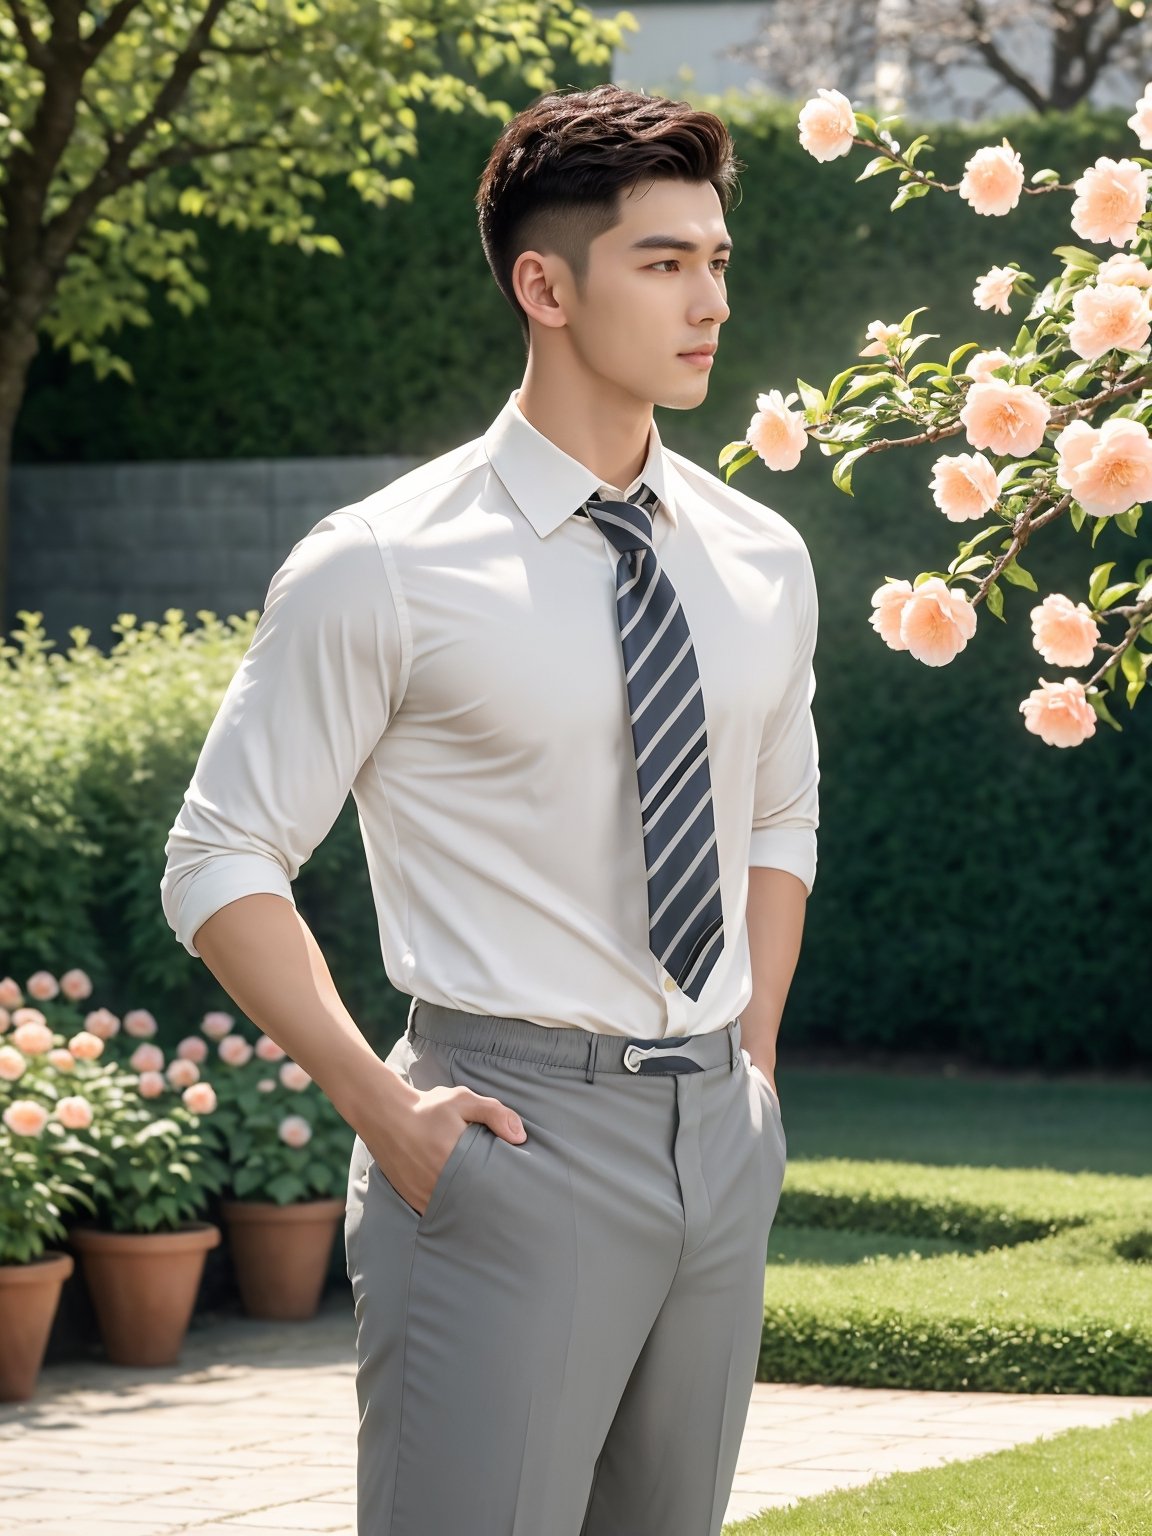 masterpiece,1 boy,Young,Handsome,Look at me,Short hair,Tea hair,Students,White shirt,Striped tie,Gray shorts,Stand,Outdoor,Garden,Peach tree,Flying petals,Light and shadow,HDR,textured skin,super detail,best quality,Germany Male,handsome male